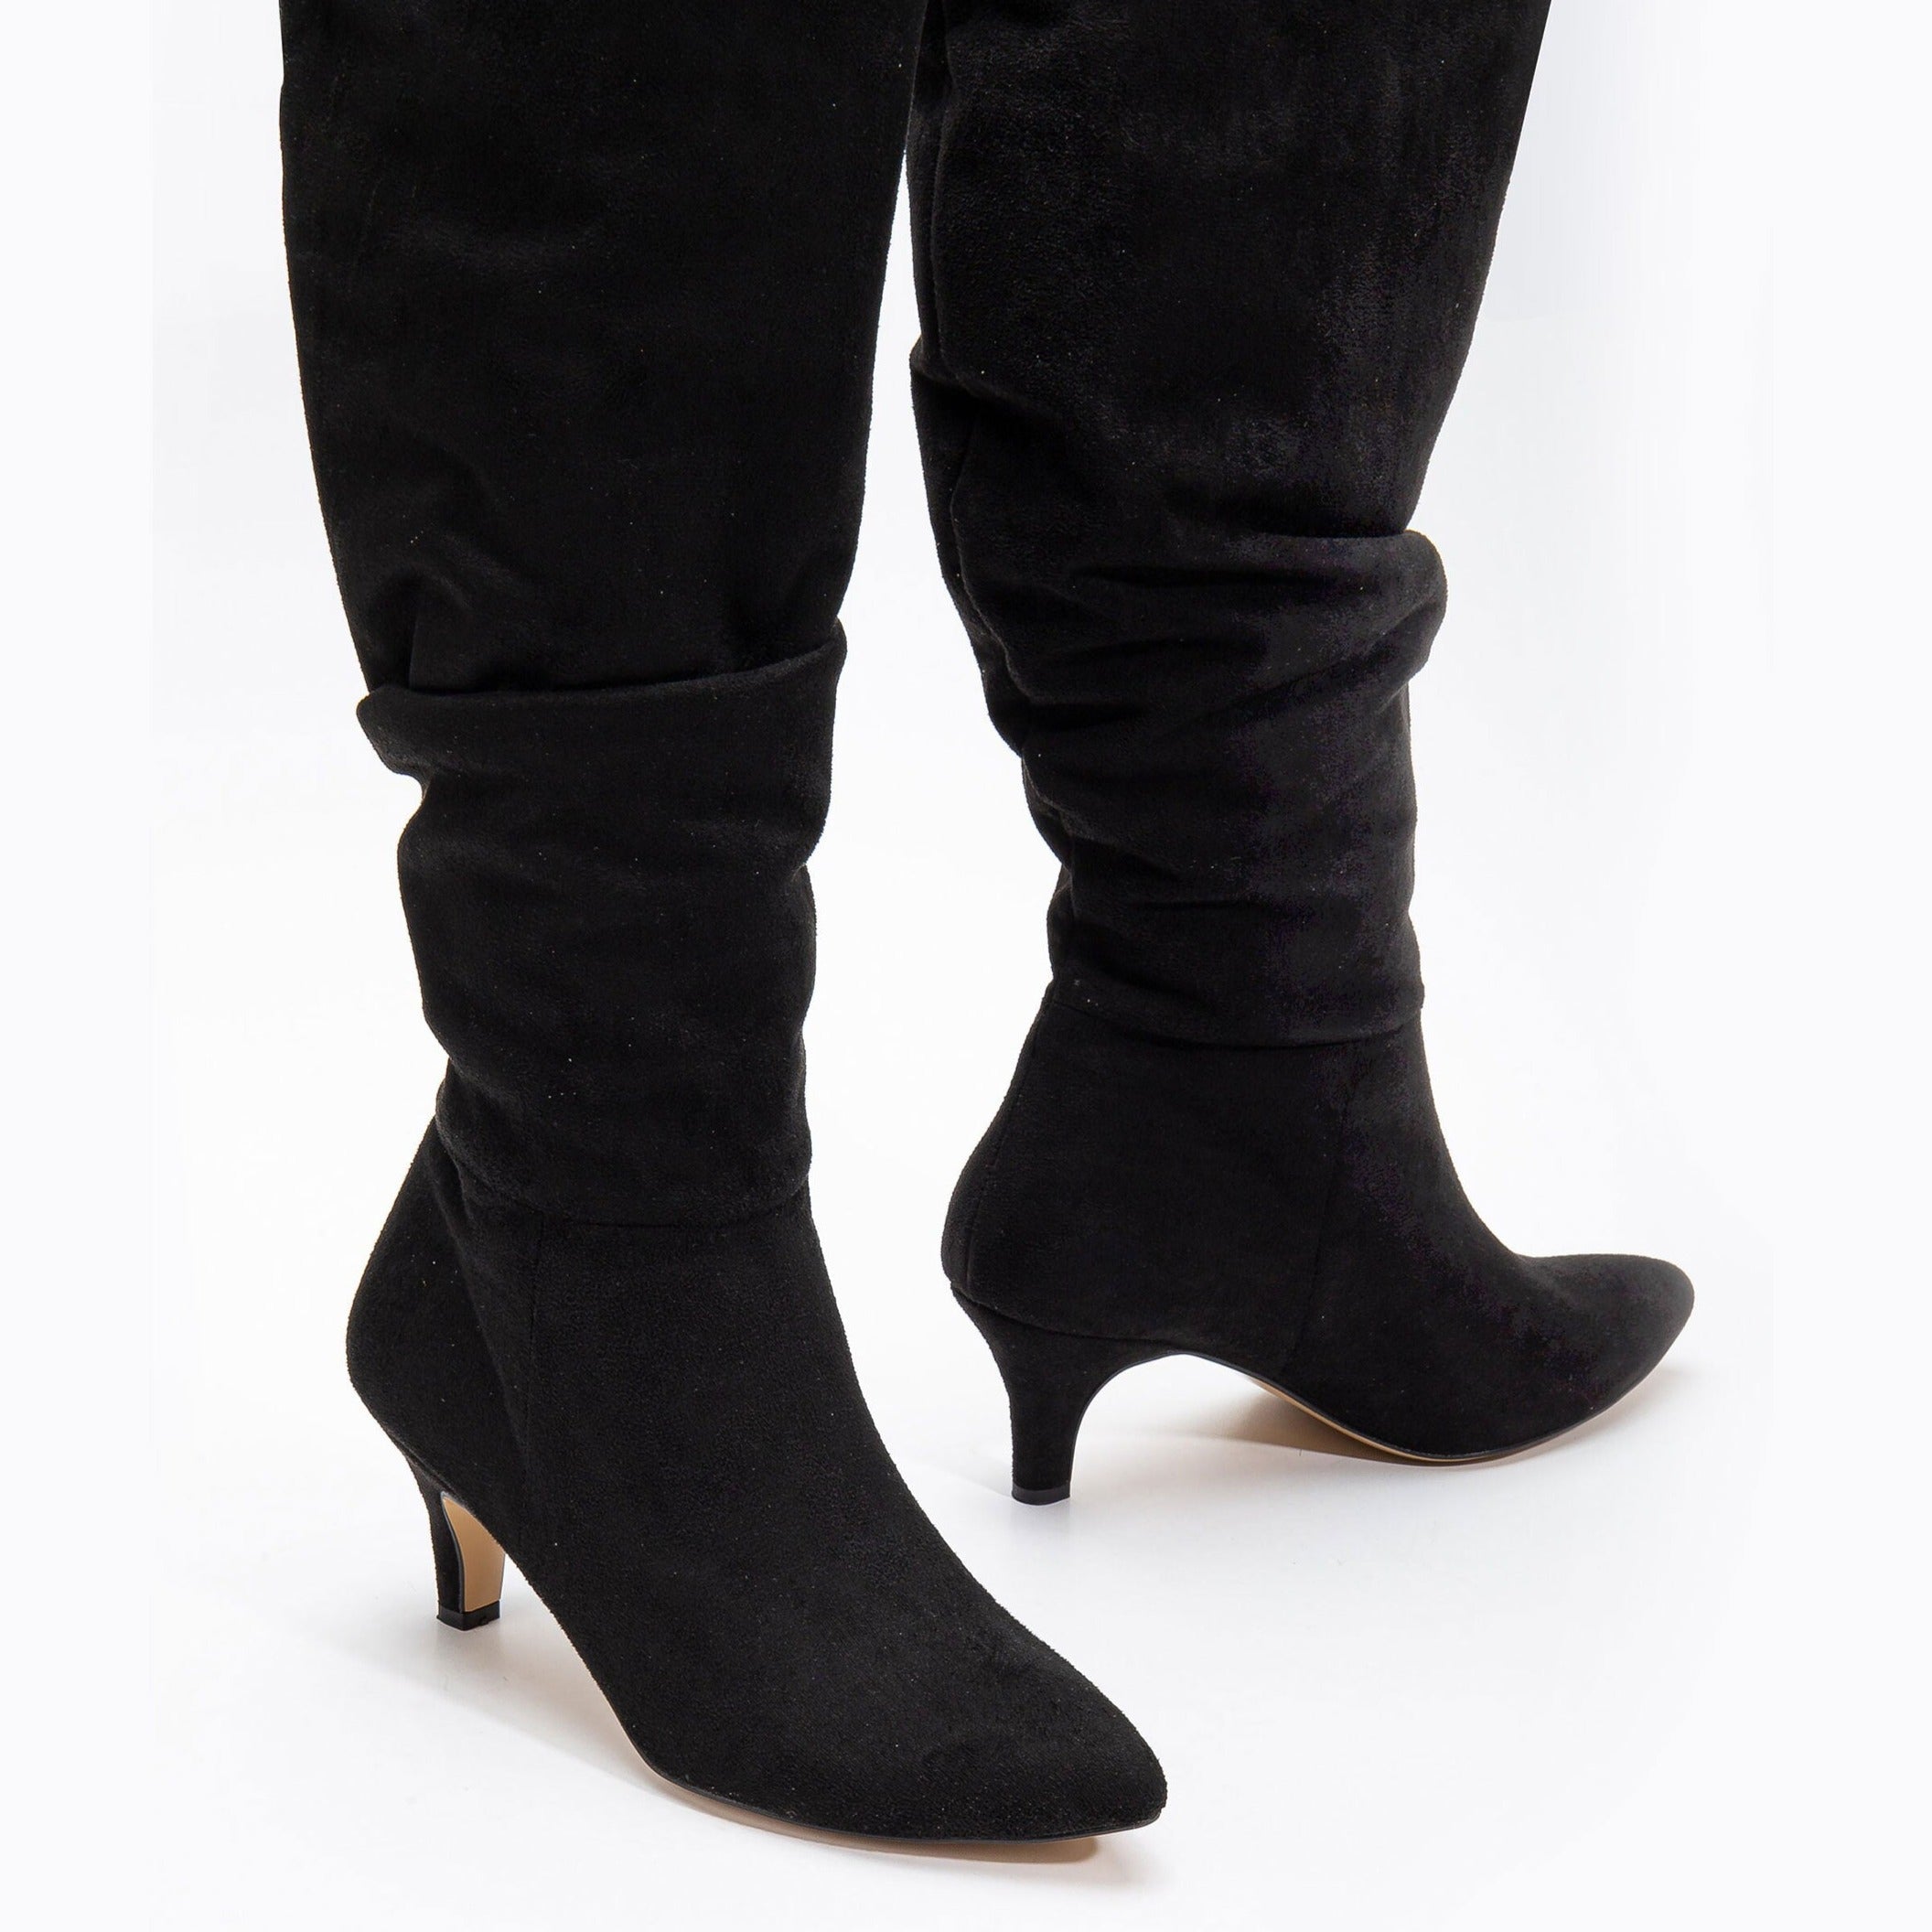 Liana - Black Suede Knee Slouchy Boots